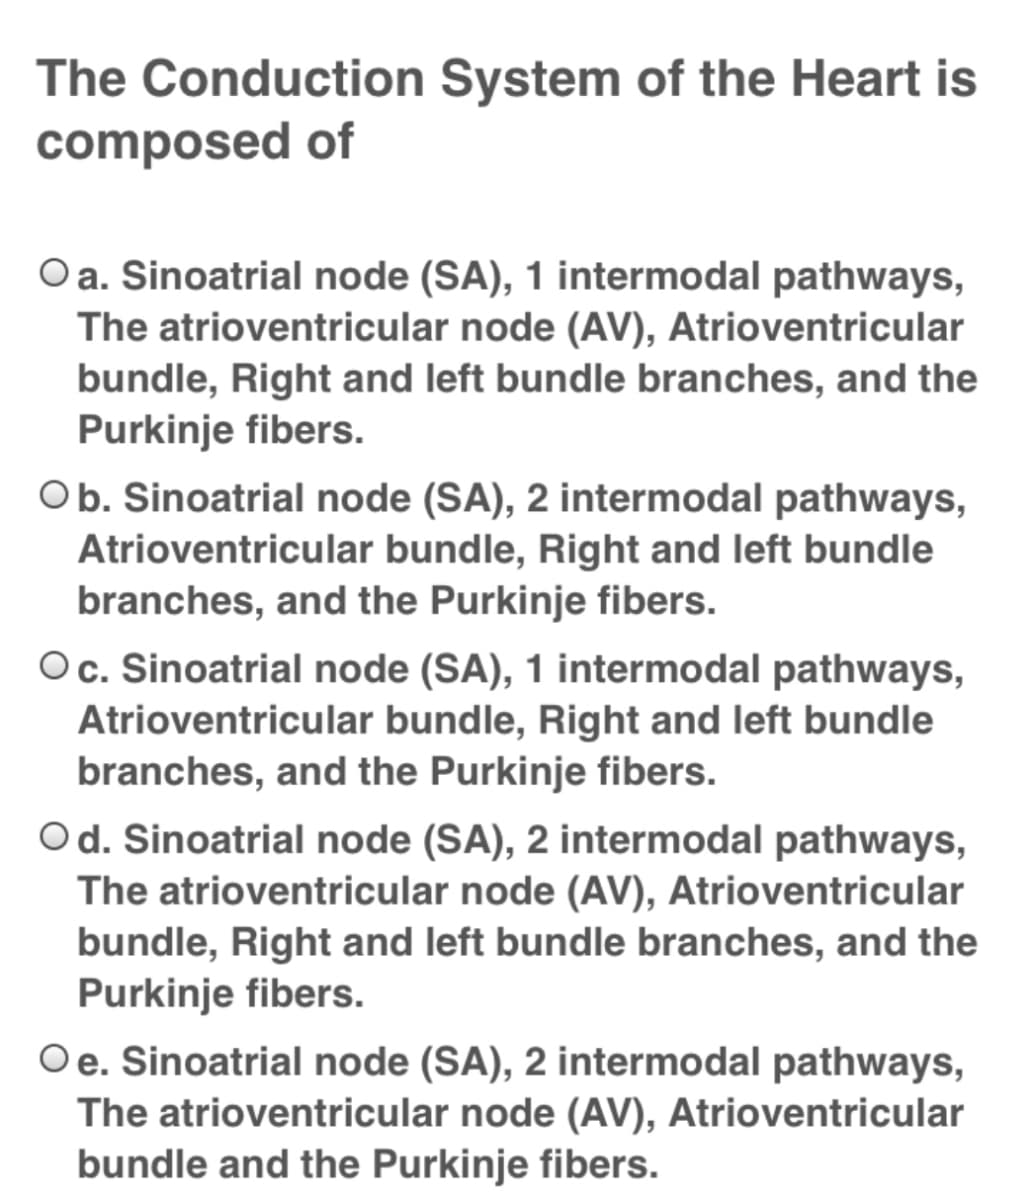 The Conduction System of the Heart is
composed of
O a. Sinoatrial node (SA), 1 intermodal pathways,
The atrioventricular node (AV), Atrioventricular
bundle, Right and left bundle branches, and the
Purkinje fibers.
Ob. Sinoatrial node (SA), 2 intermodal pathways,
Atrioventricular bundle, Right and left bundle
branches, and the Purkinje fibers.
Oc. Sinoatrial node (SA), 1 intermodal pathways,
Atrioventricular bundle, Right and left bundle
branches, and the Purkinje fibers.
Od. Sinoatrial node (SA), 2 intermodal pathways,
The atrioventricular node (AV), Atrioventricular
bundle, Right and left bundle branches, and the
Purkinje fibers.
Oe. Sinoatrial node (SA), 2 intermodal pathways,
The atrioventricular node (AV), Atrioventricular
bundle and the Purkinje fibers.
